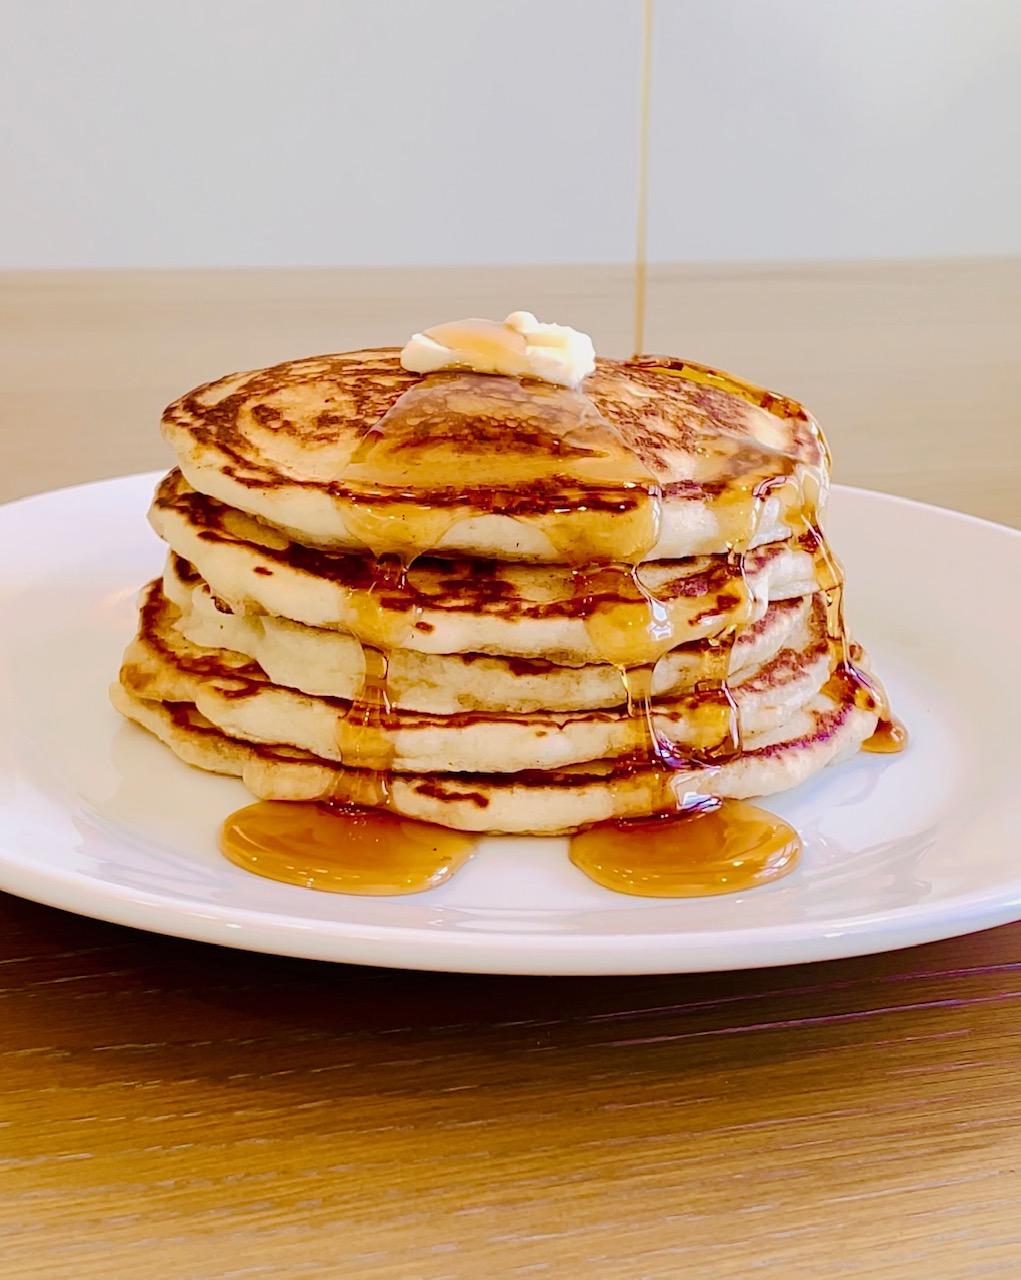 The best homemade pancakes ever!